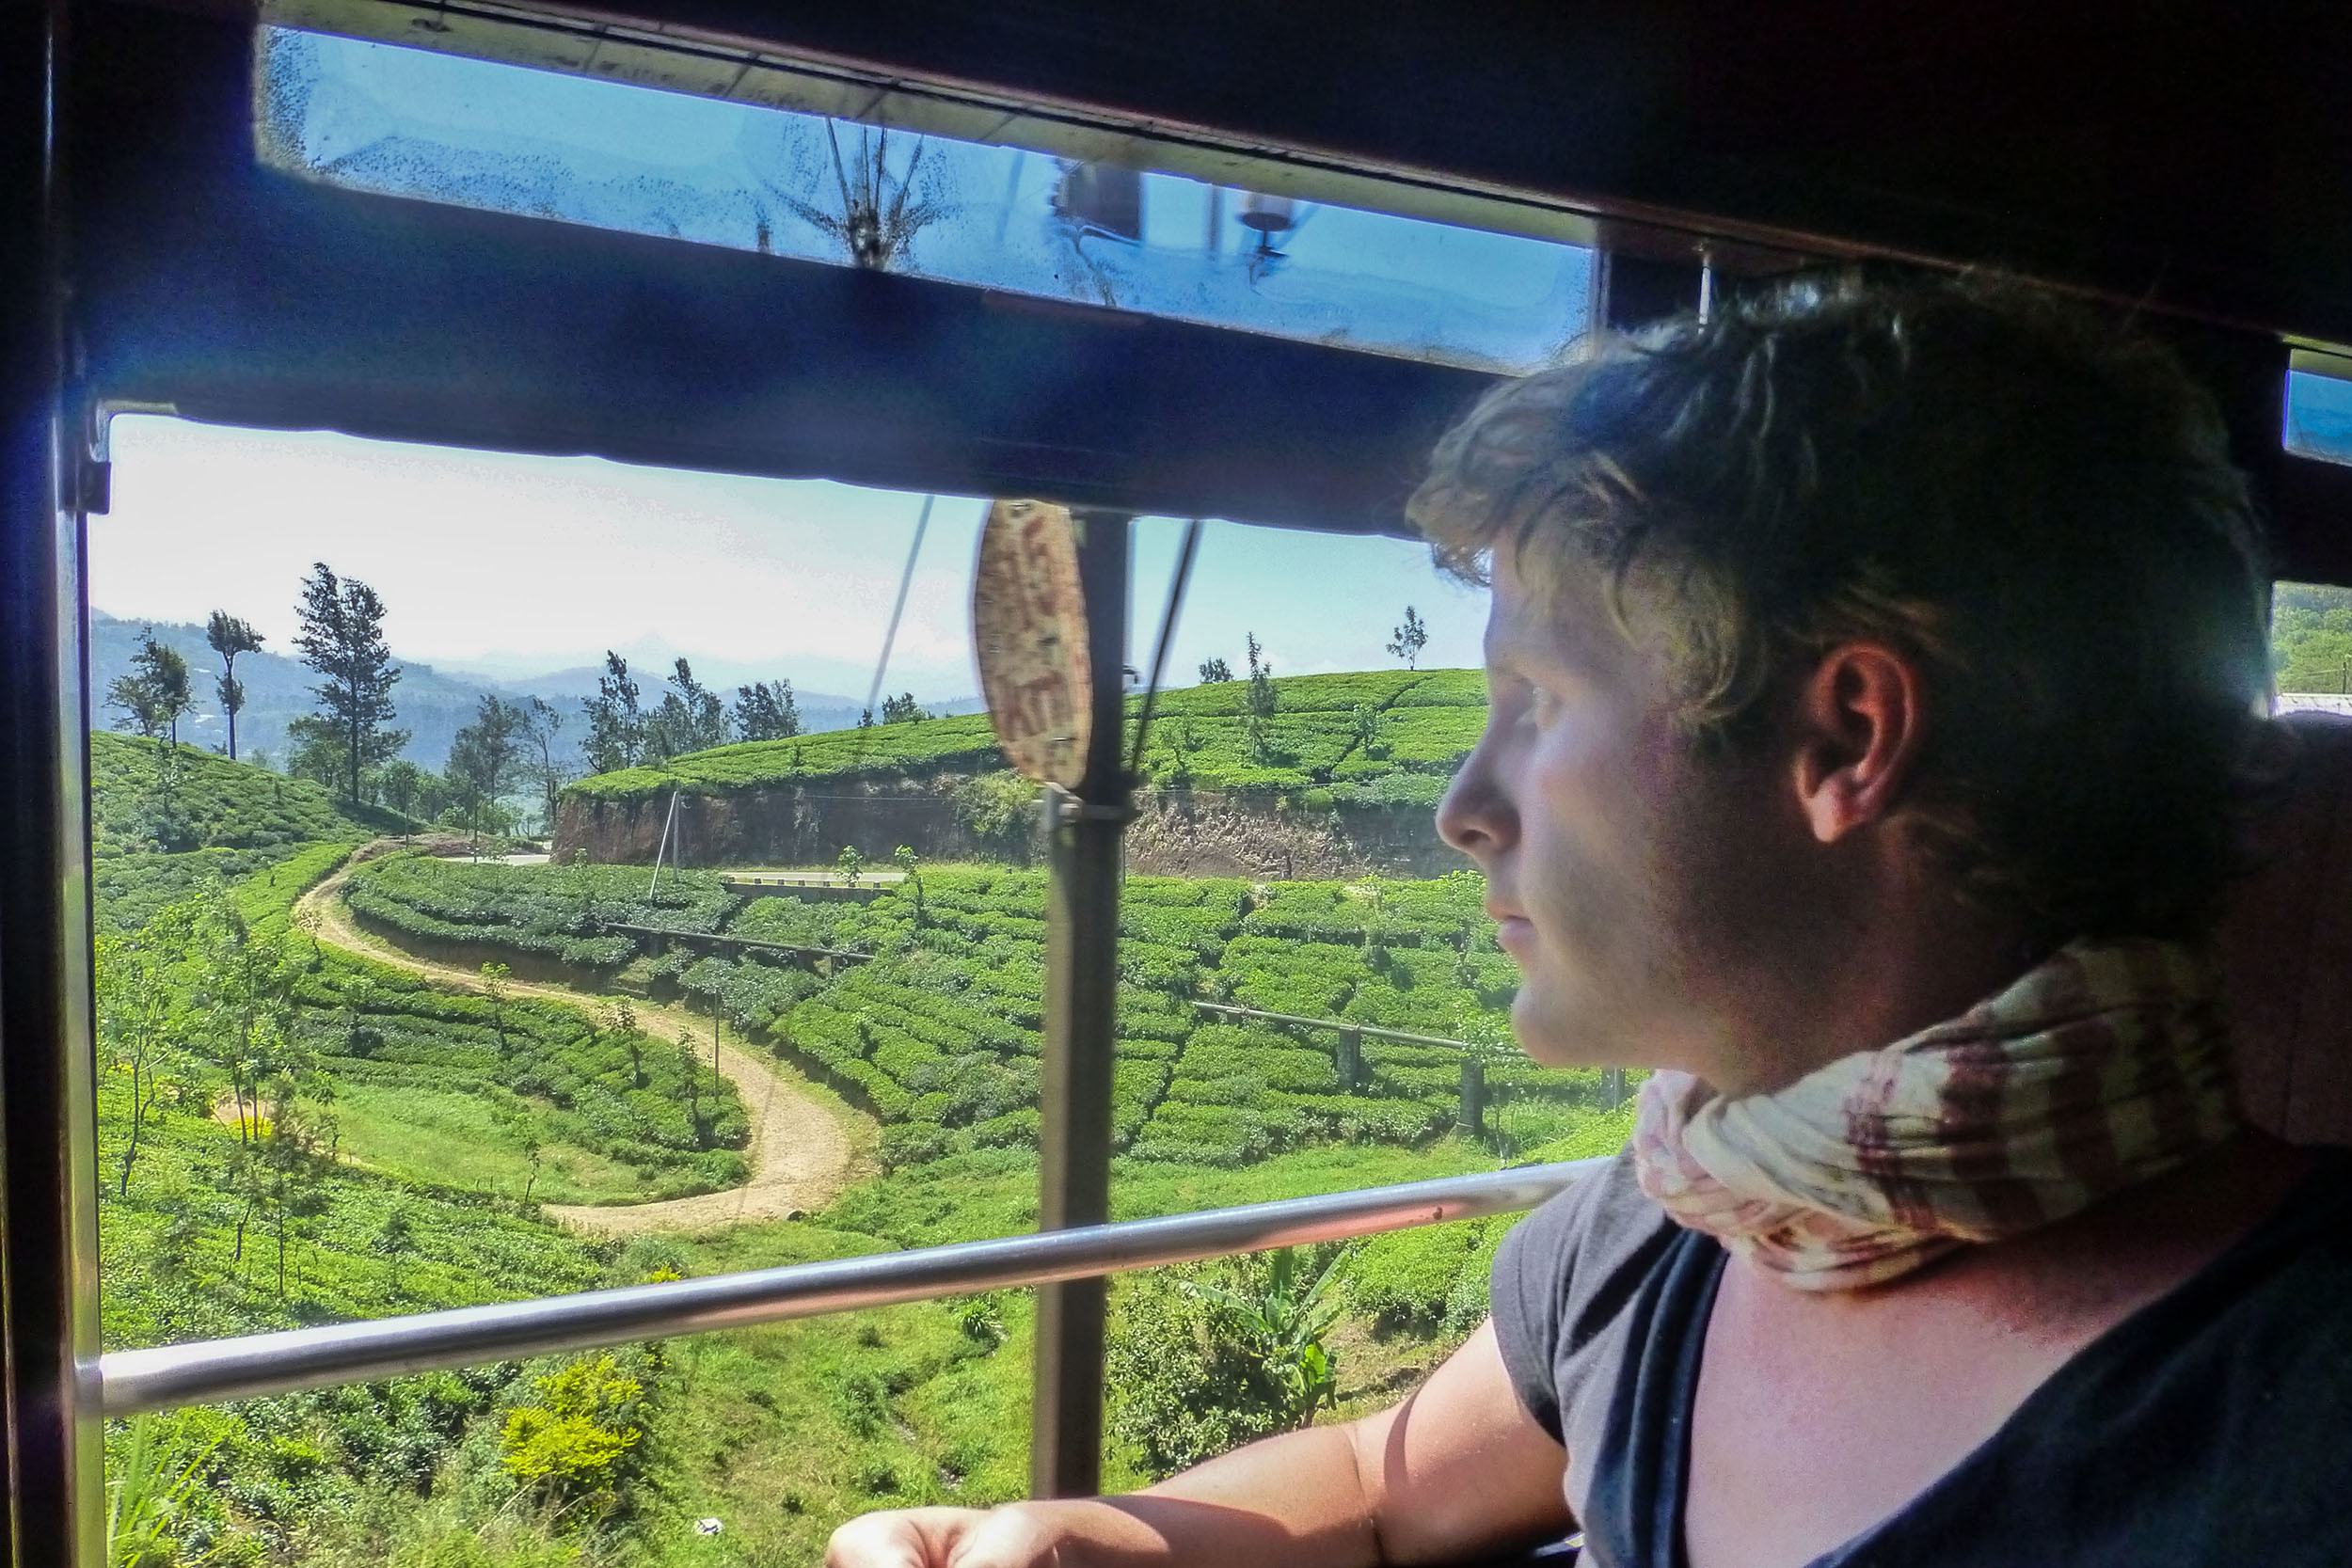 Ben looking out window of train between Kandy and Ella in Sri Lanka